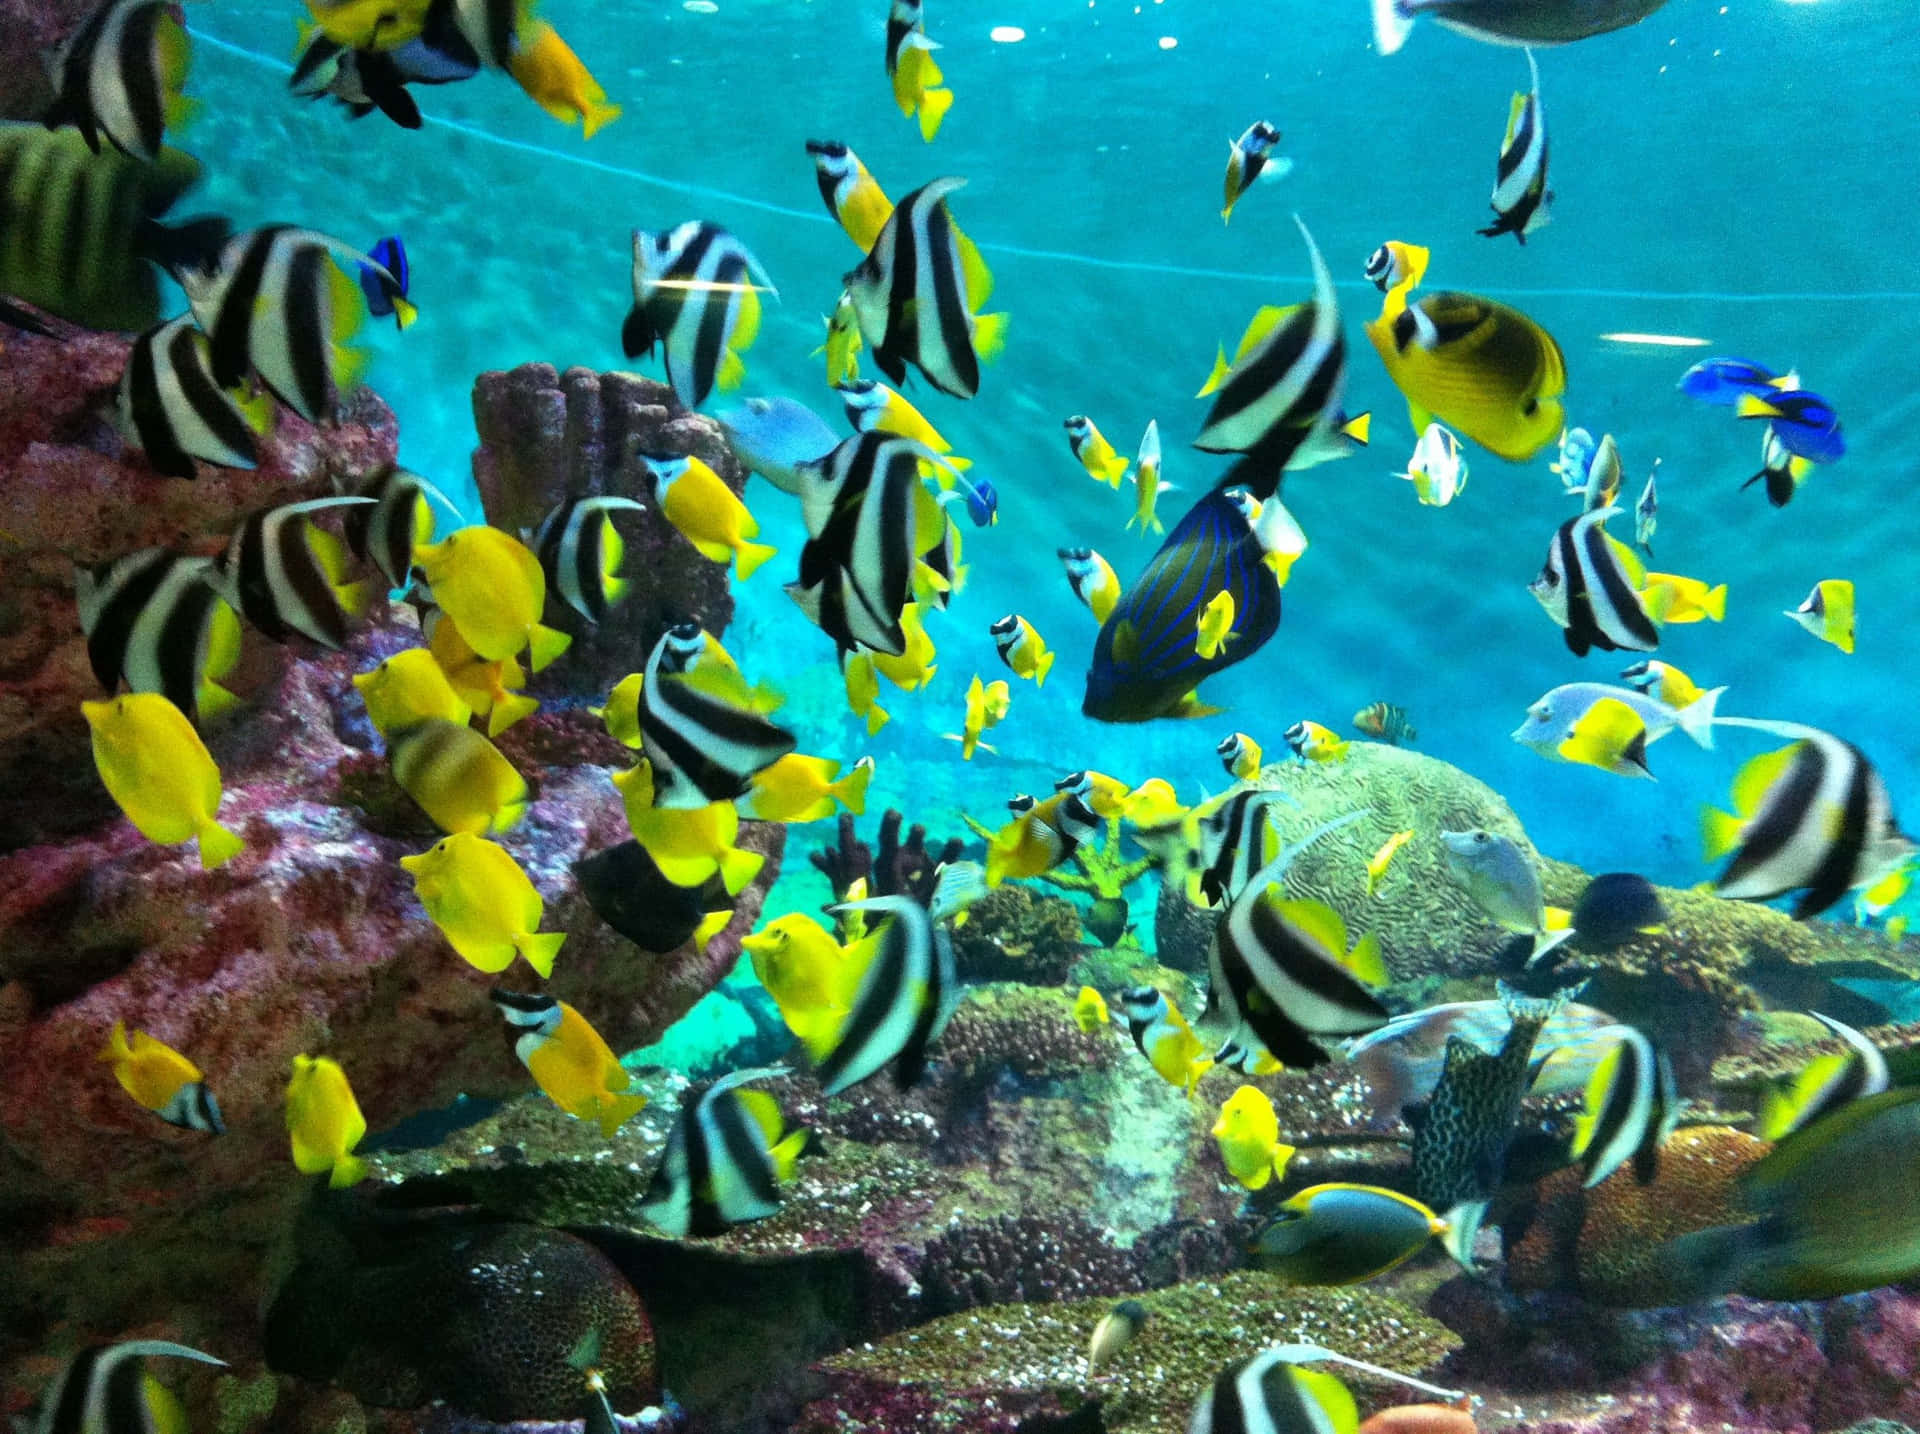 A school of vibrant tropical fish swims peacefully around a vibrant coral reef. Wallpaper